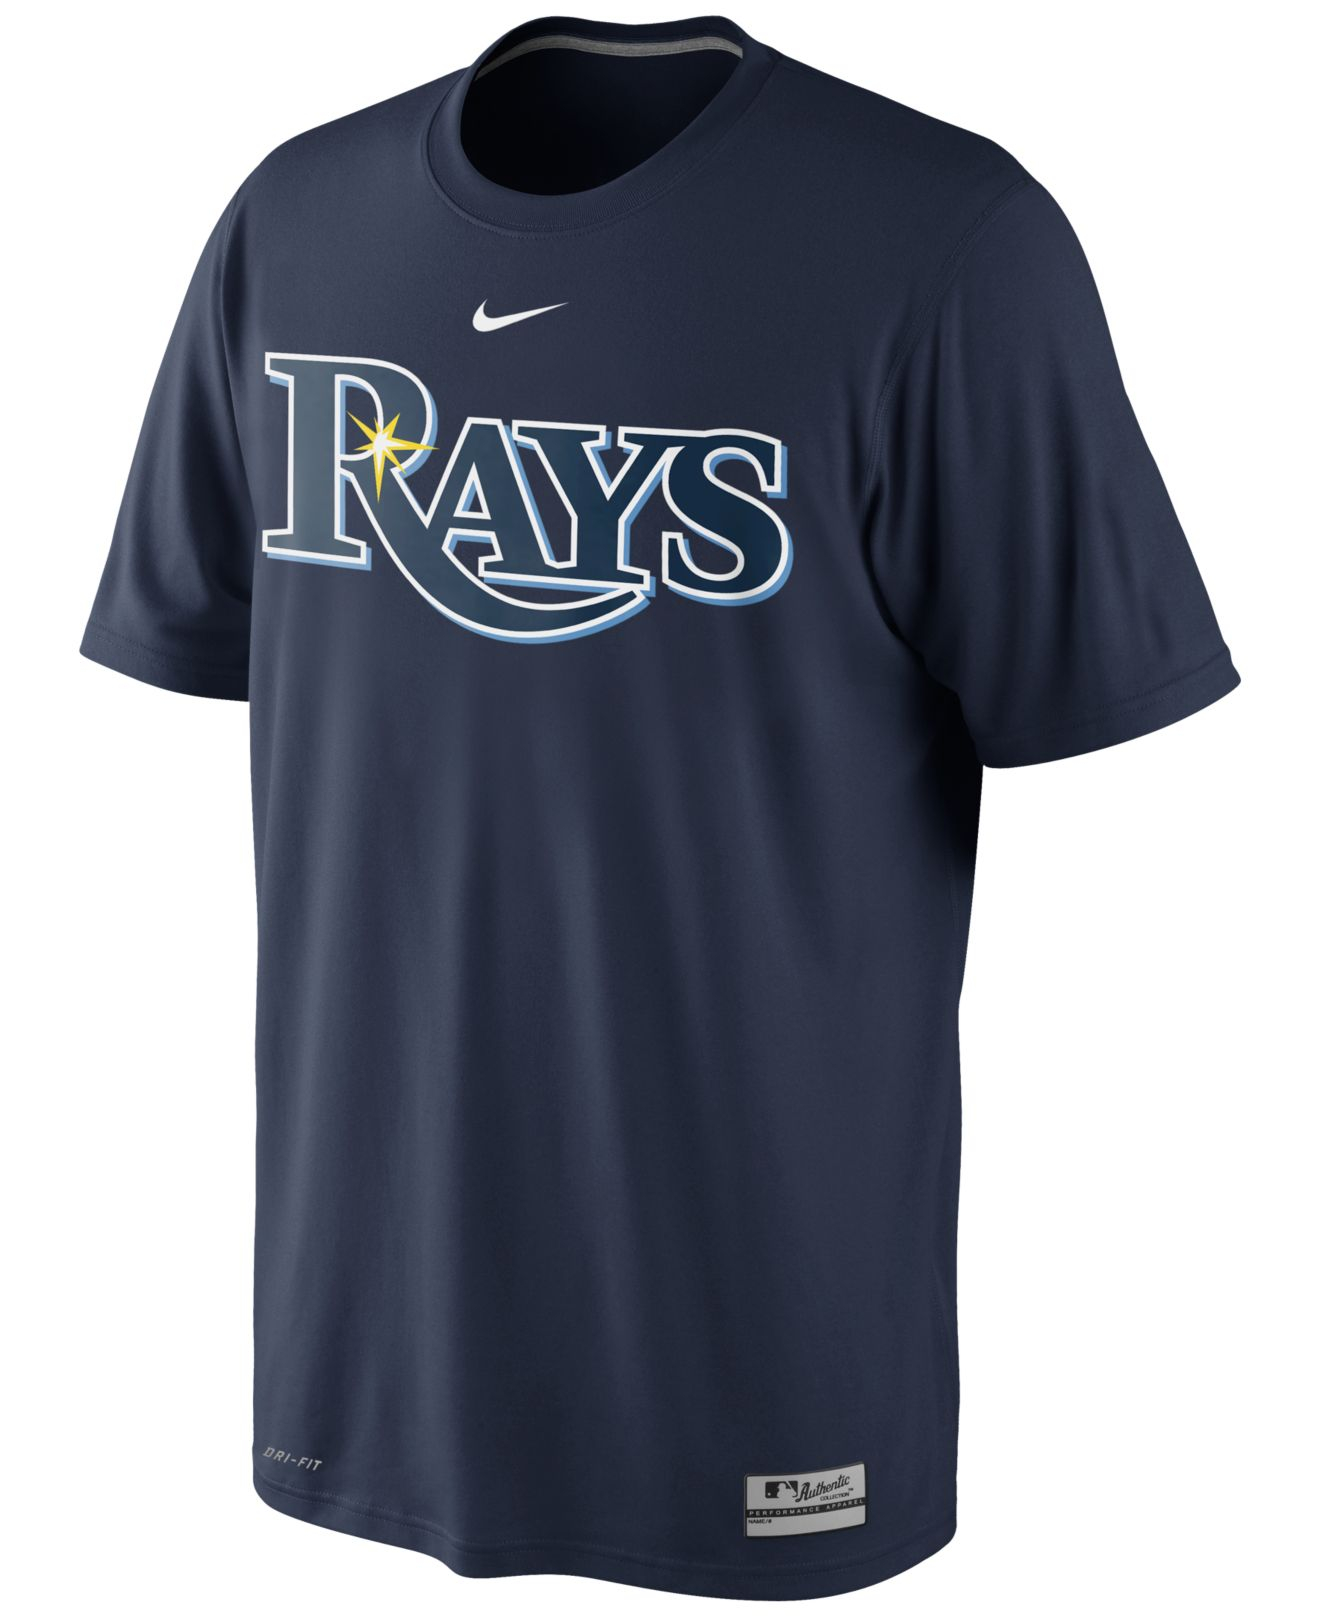 Lyst - Nike Men's Short-sleeve Dri-fit Tampa Bay Rays T-shirt in Blue ...